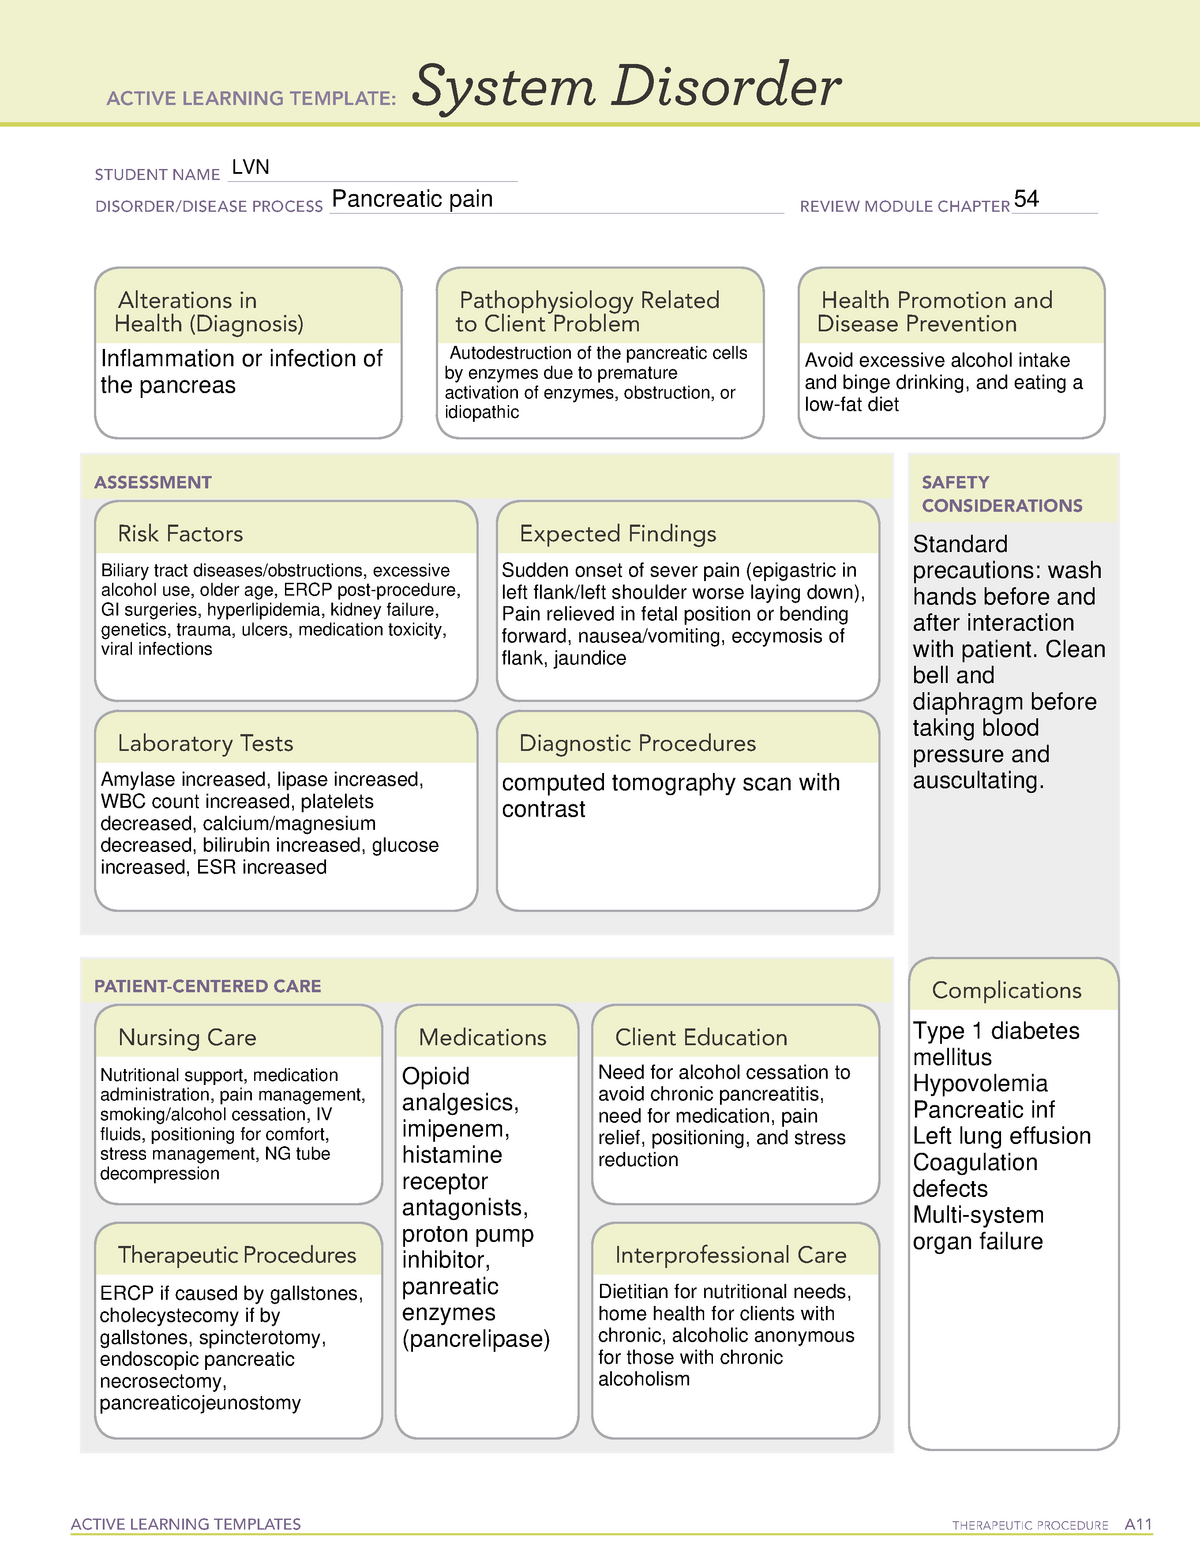 pancreatic-pain-template-active-learning-templates-therapeutic-procedure-a-system-disorder